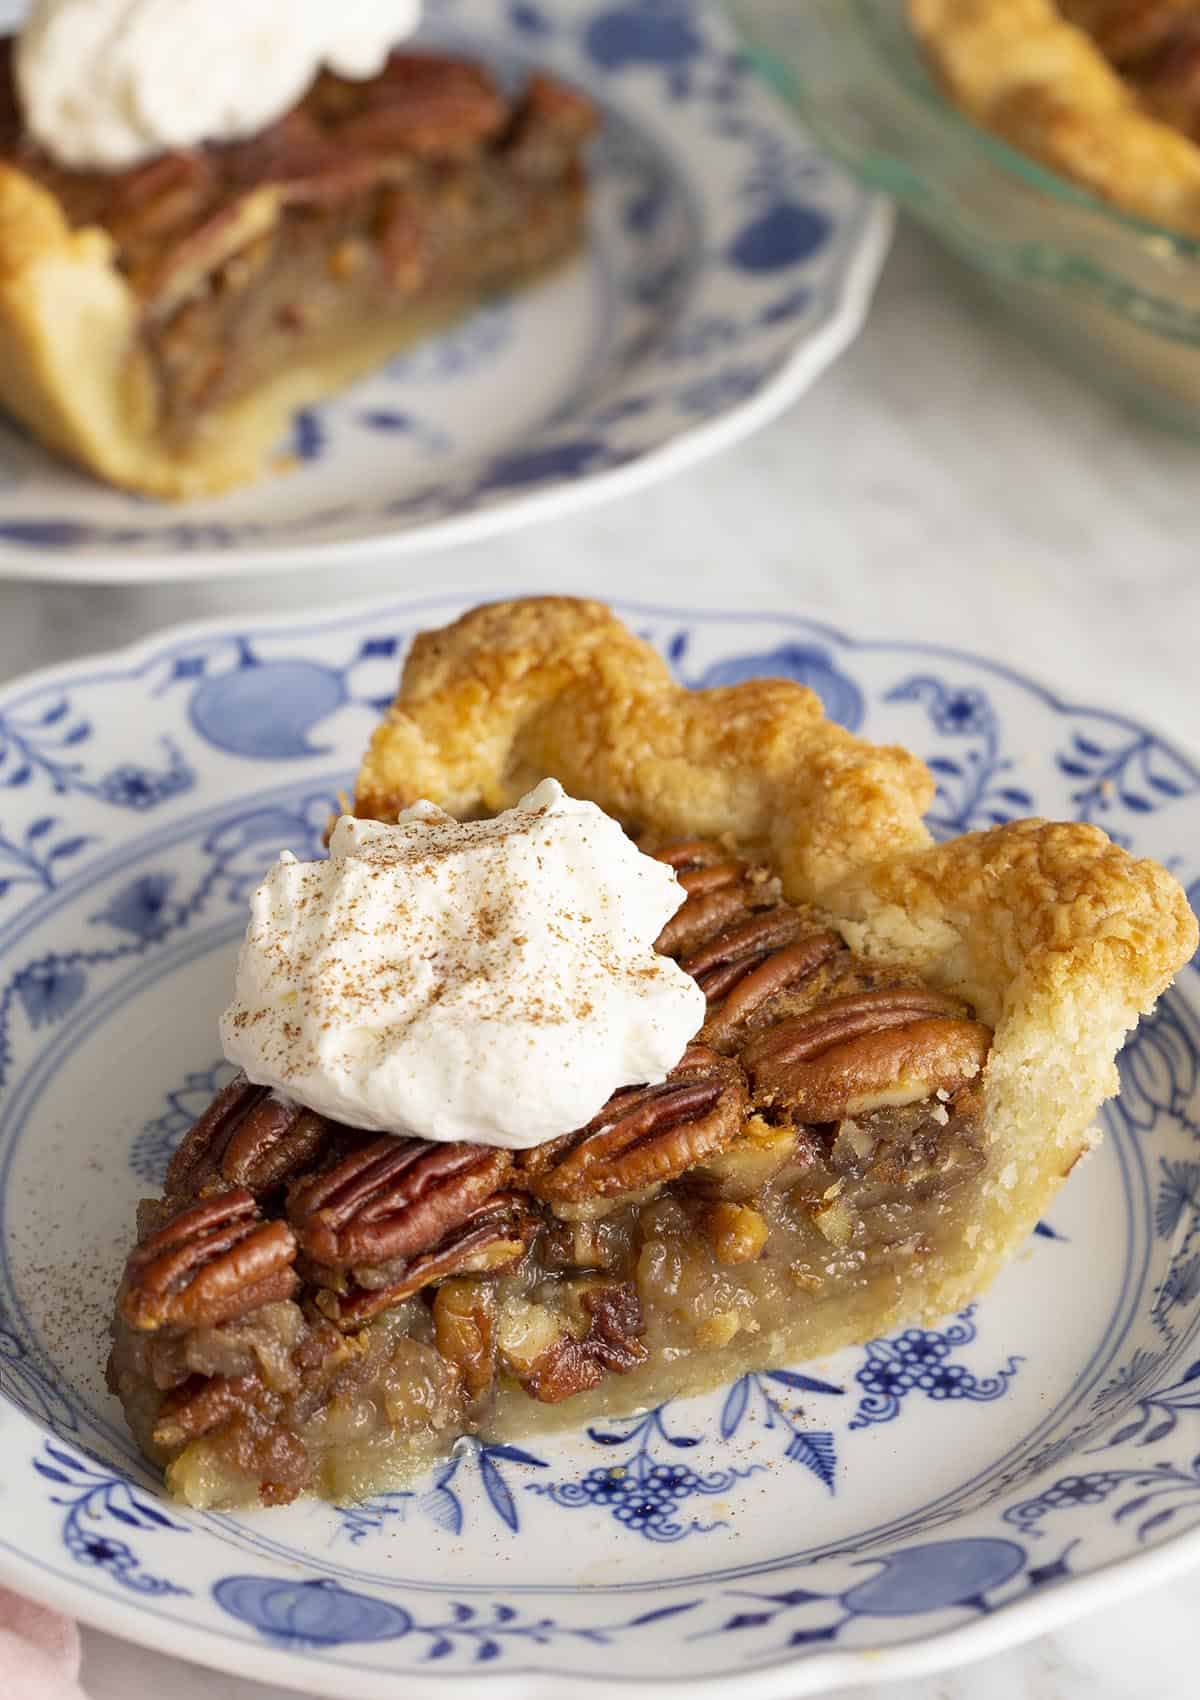 Two pieces of pecan pie on blue and white plates on a marble table.